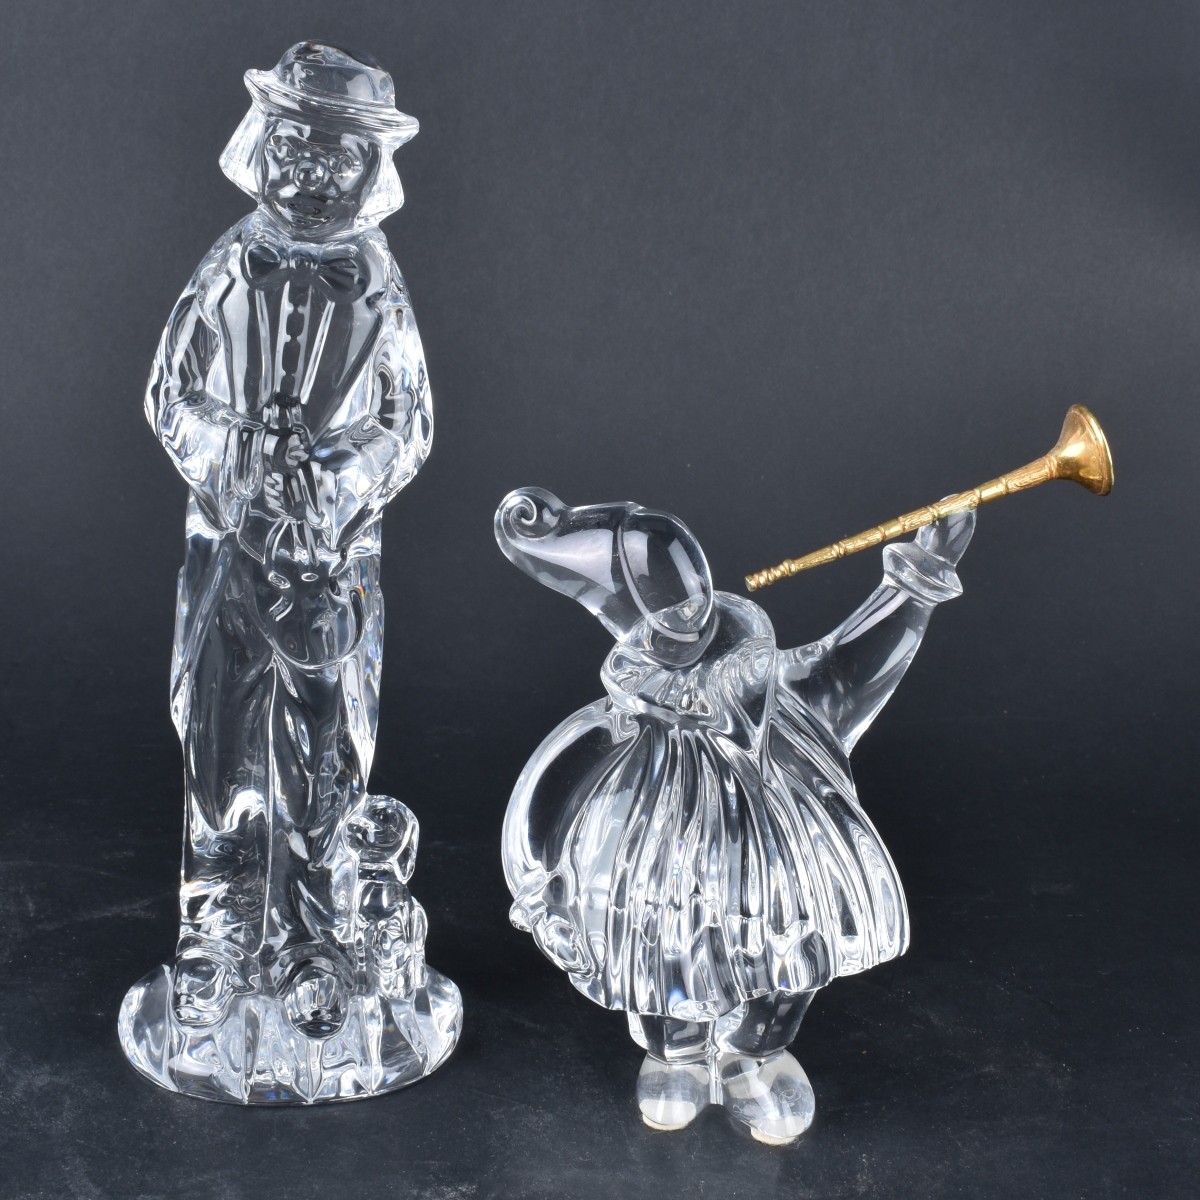 Baccarat/Waterford Figurines